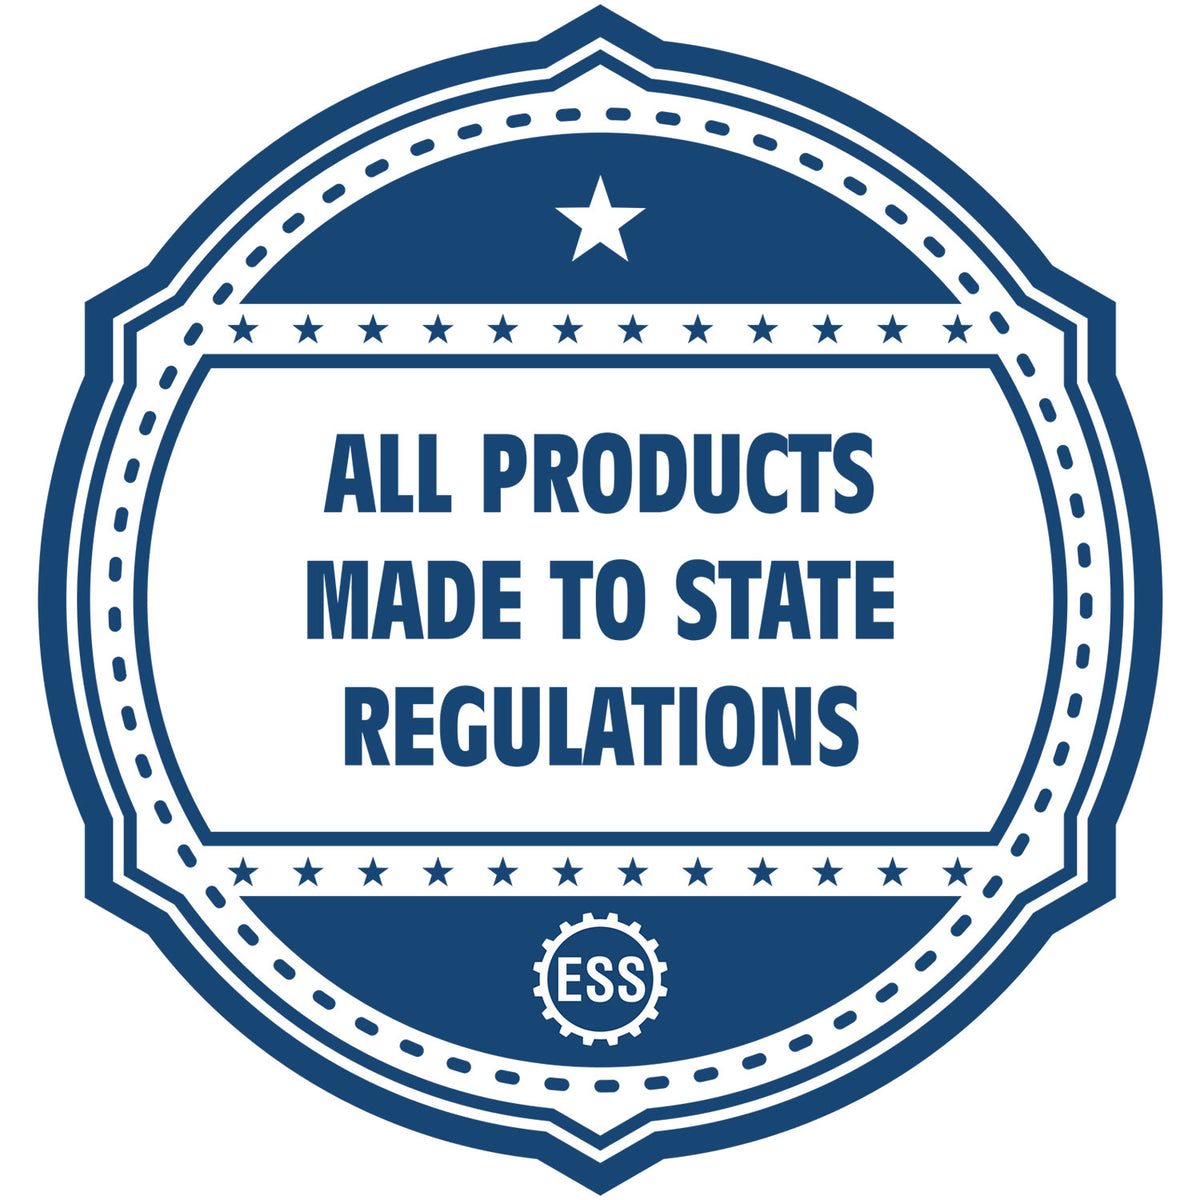 A blue icon or badge for the Kansas Professional Geologist Seal Stamp showing that this product is made in compliance with state regulations.